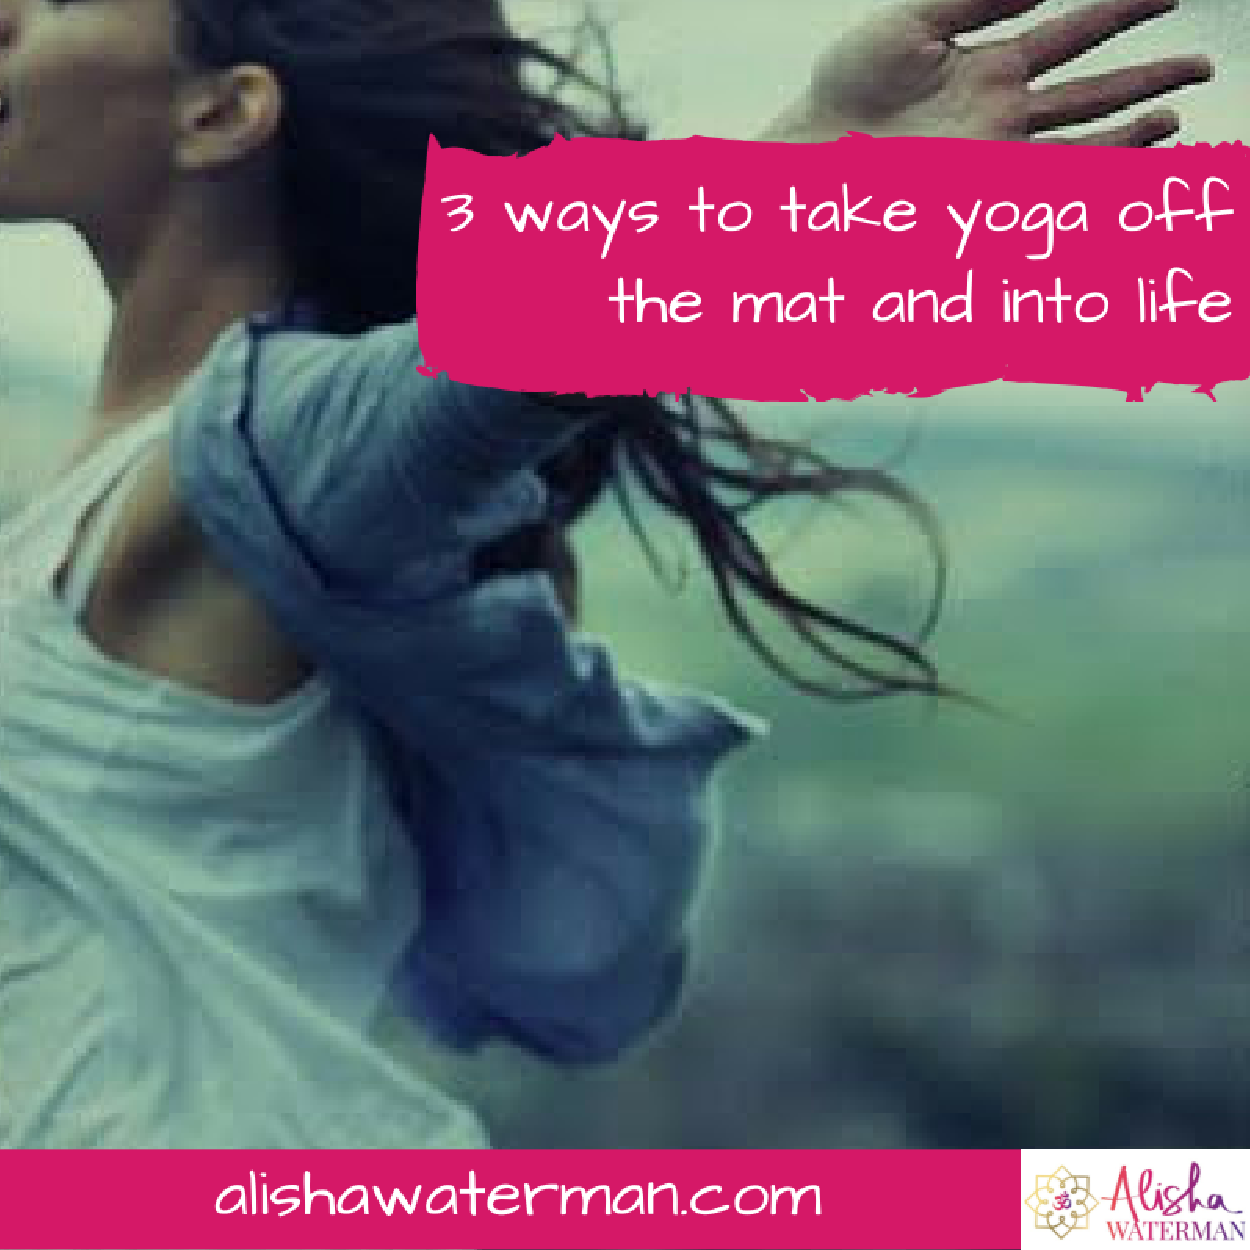 3 ways to take yoga off the mat and into life